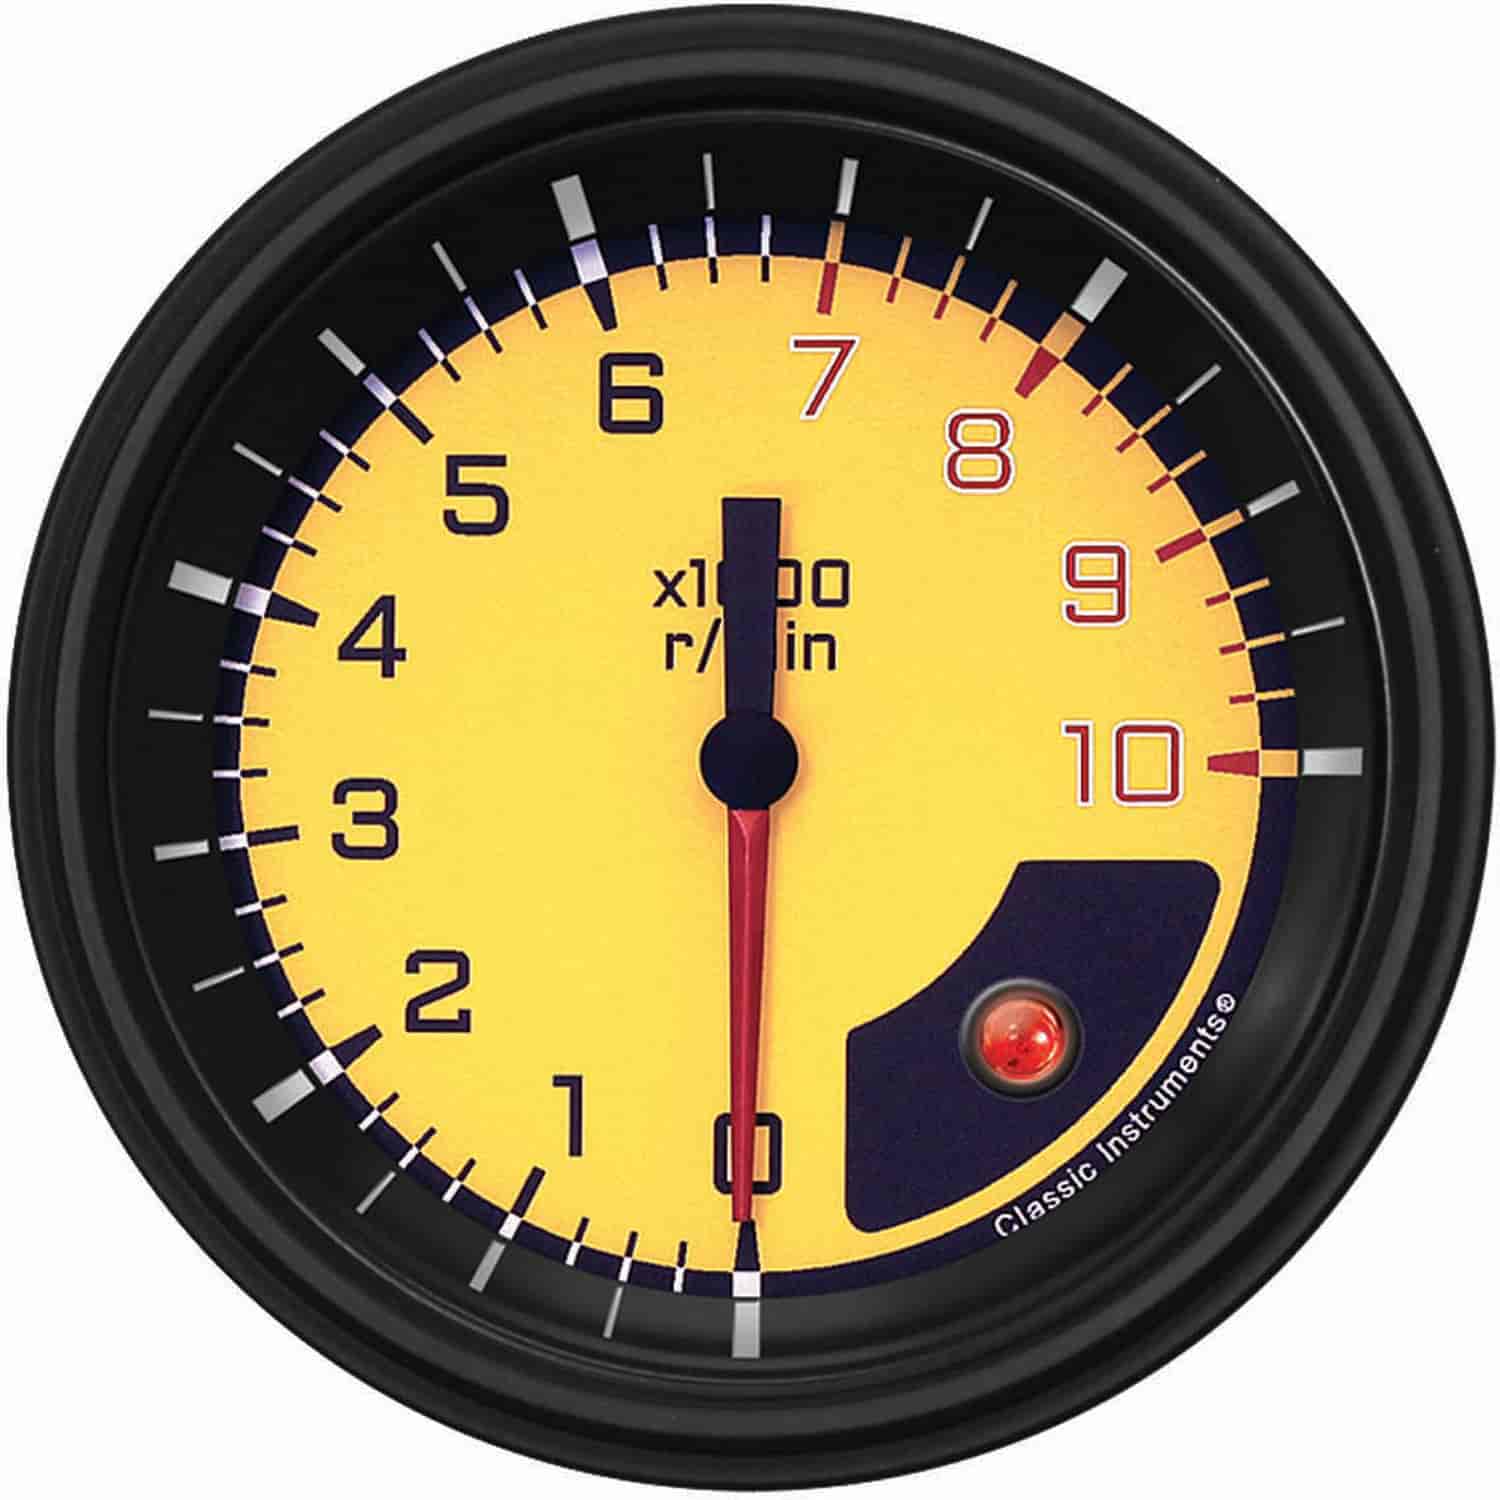 Yellow AutoCross Series Tachometer 3-3/8" Electrical